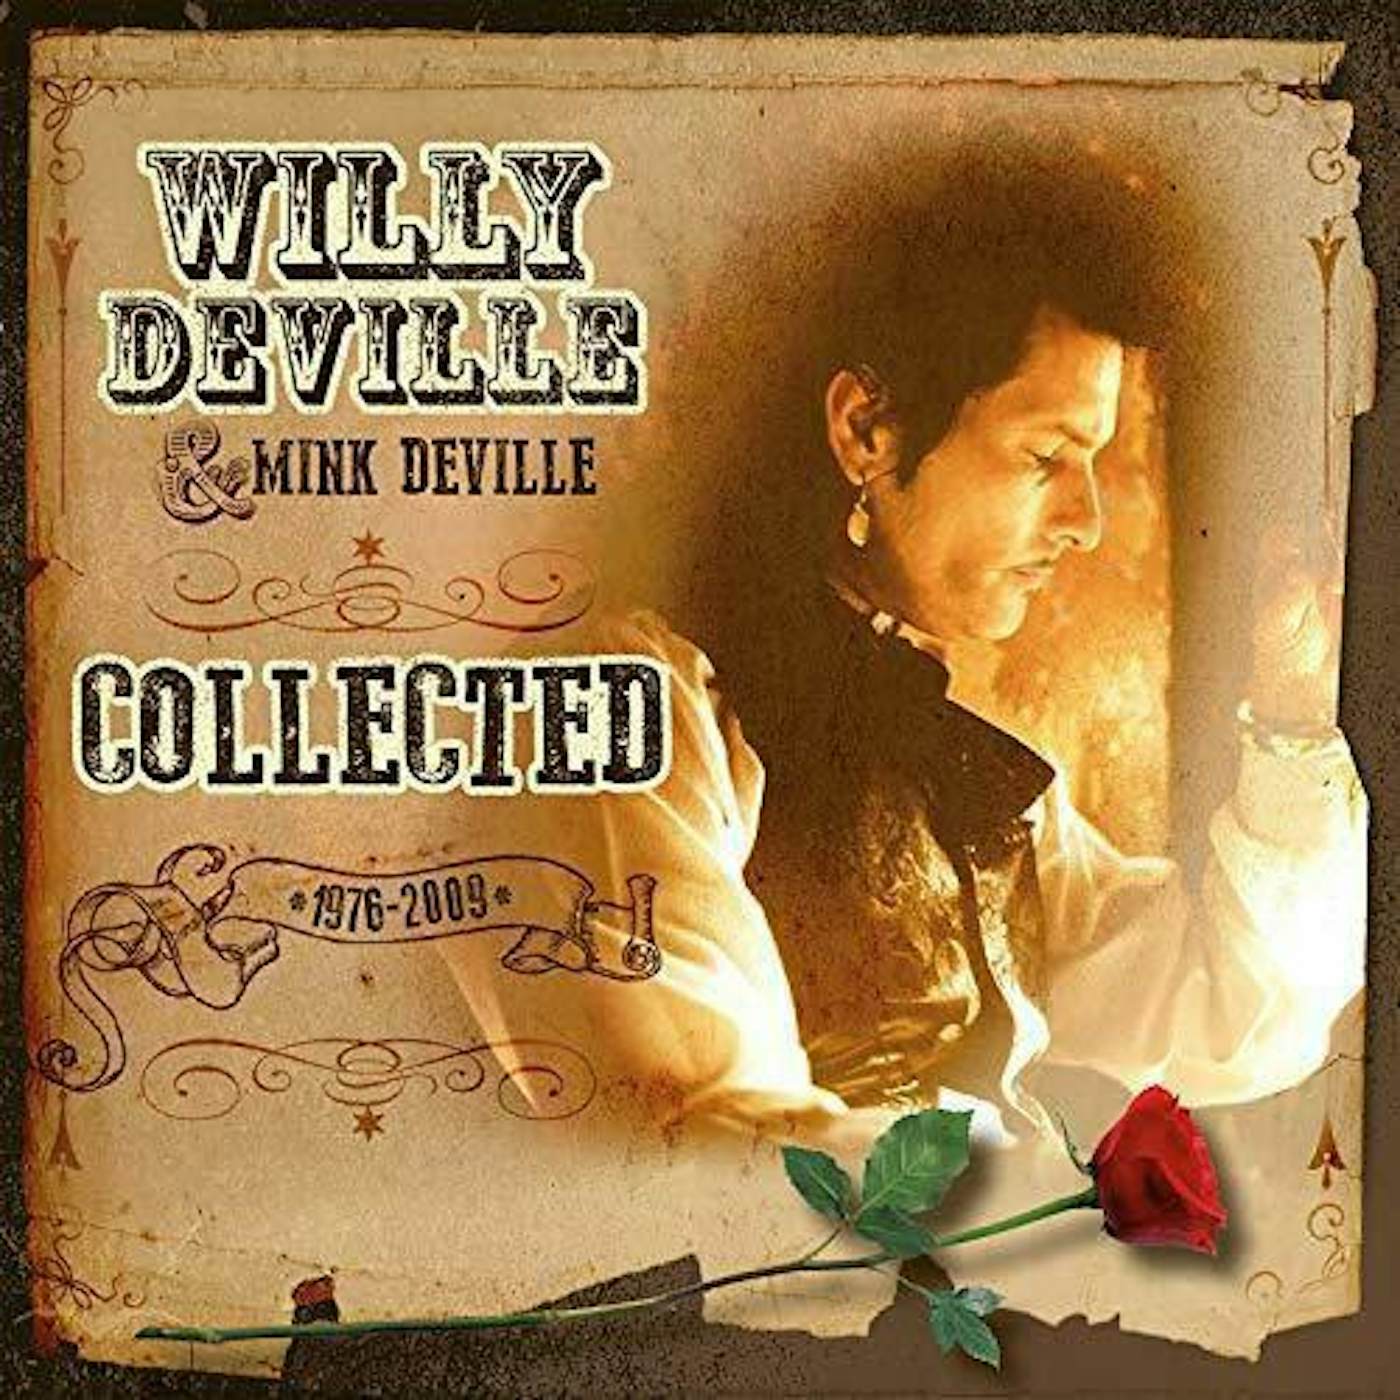 Willy DeVille Collected Transparent Green Vinyl Record